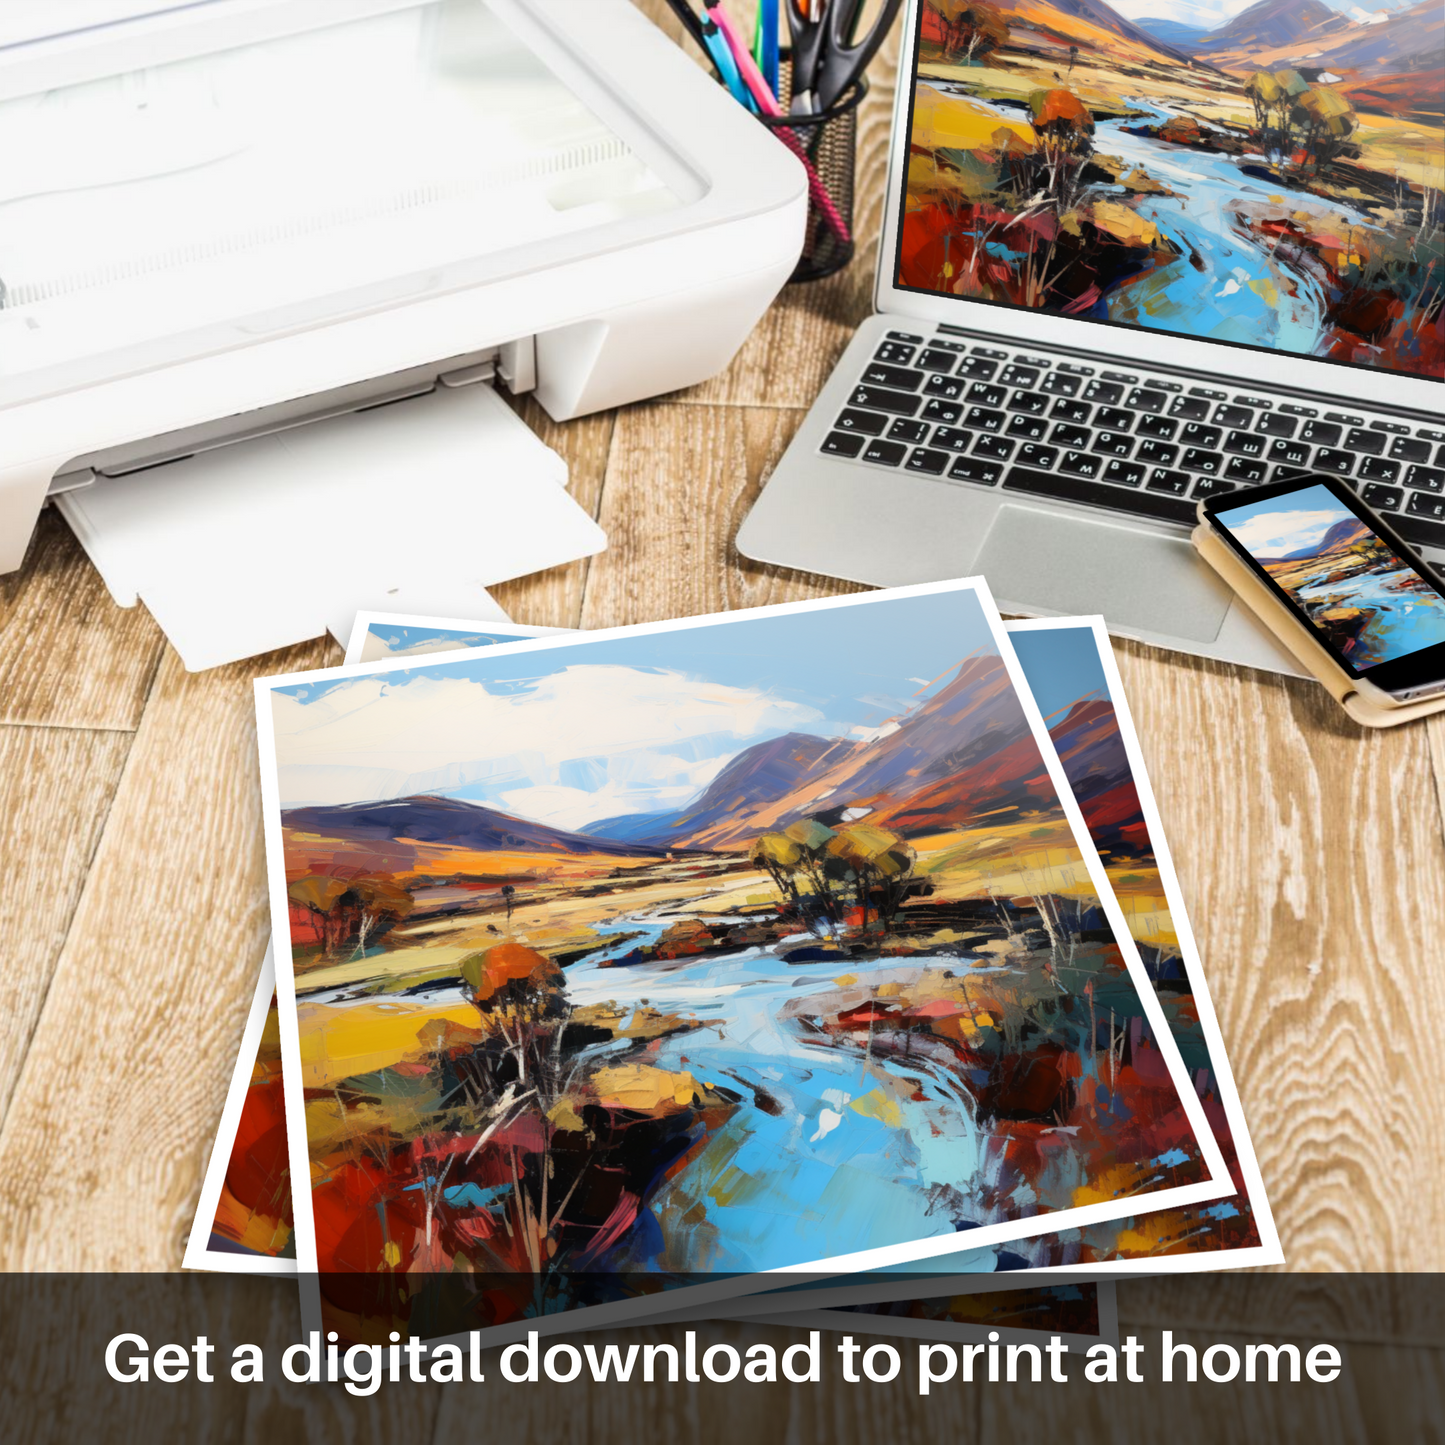 Downloadable and printable picture of Glen Esk, Angus